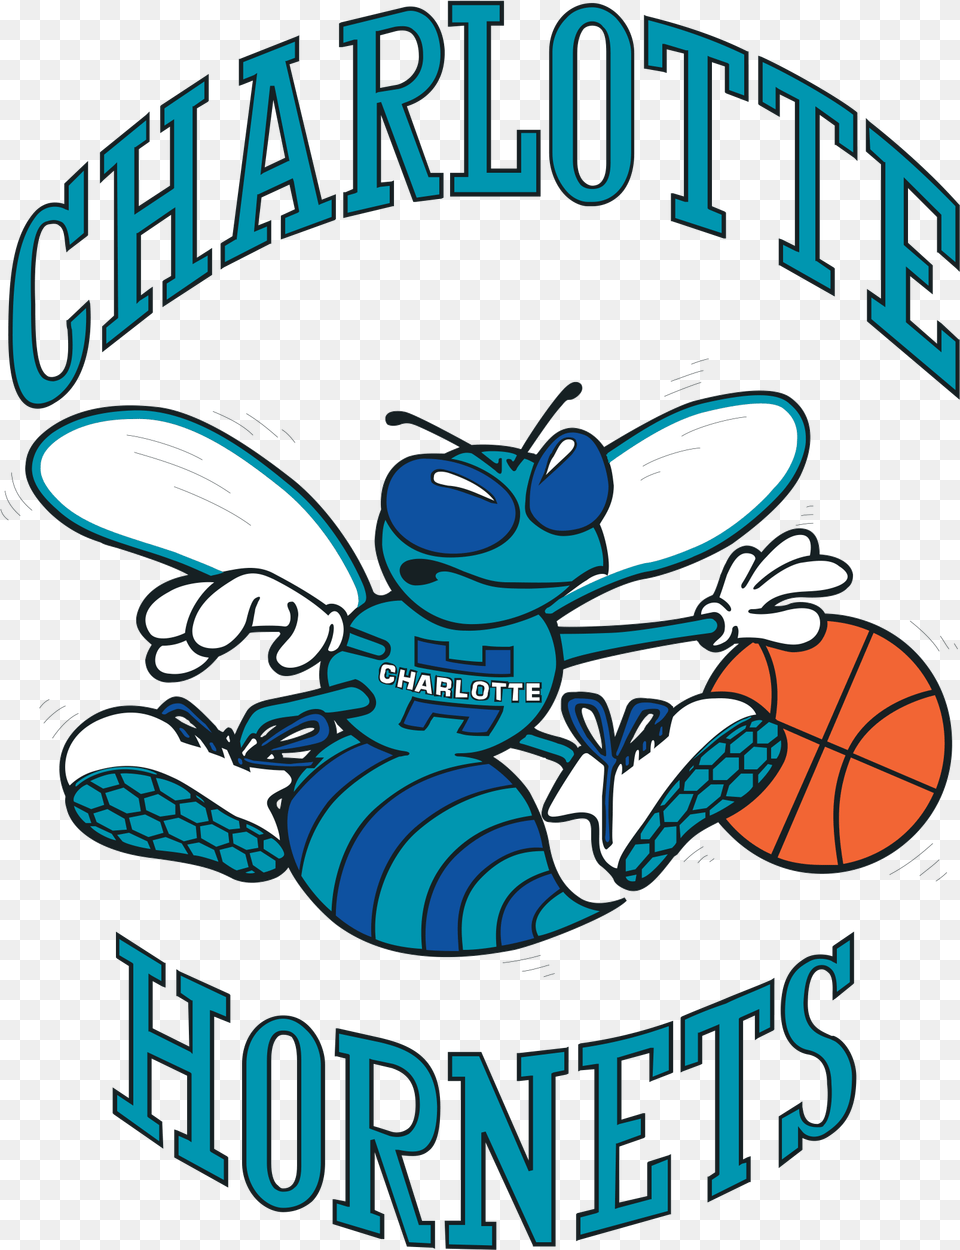 New Orleans Pelicans Logos History Team And Primary Emblem Charlotte Hornets, Advertisement, Poster, Dynamite, Weapon Png